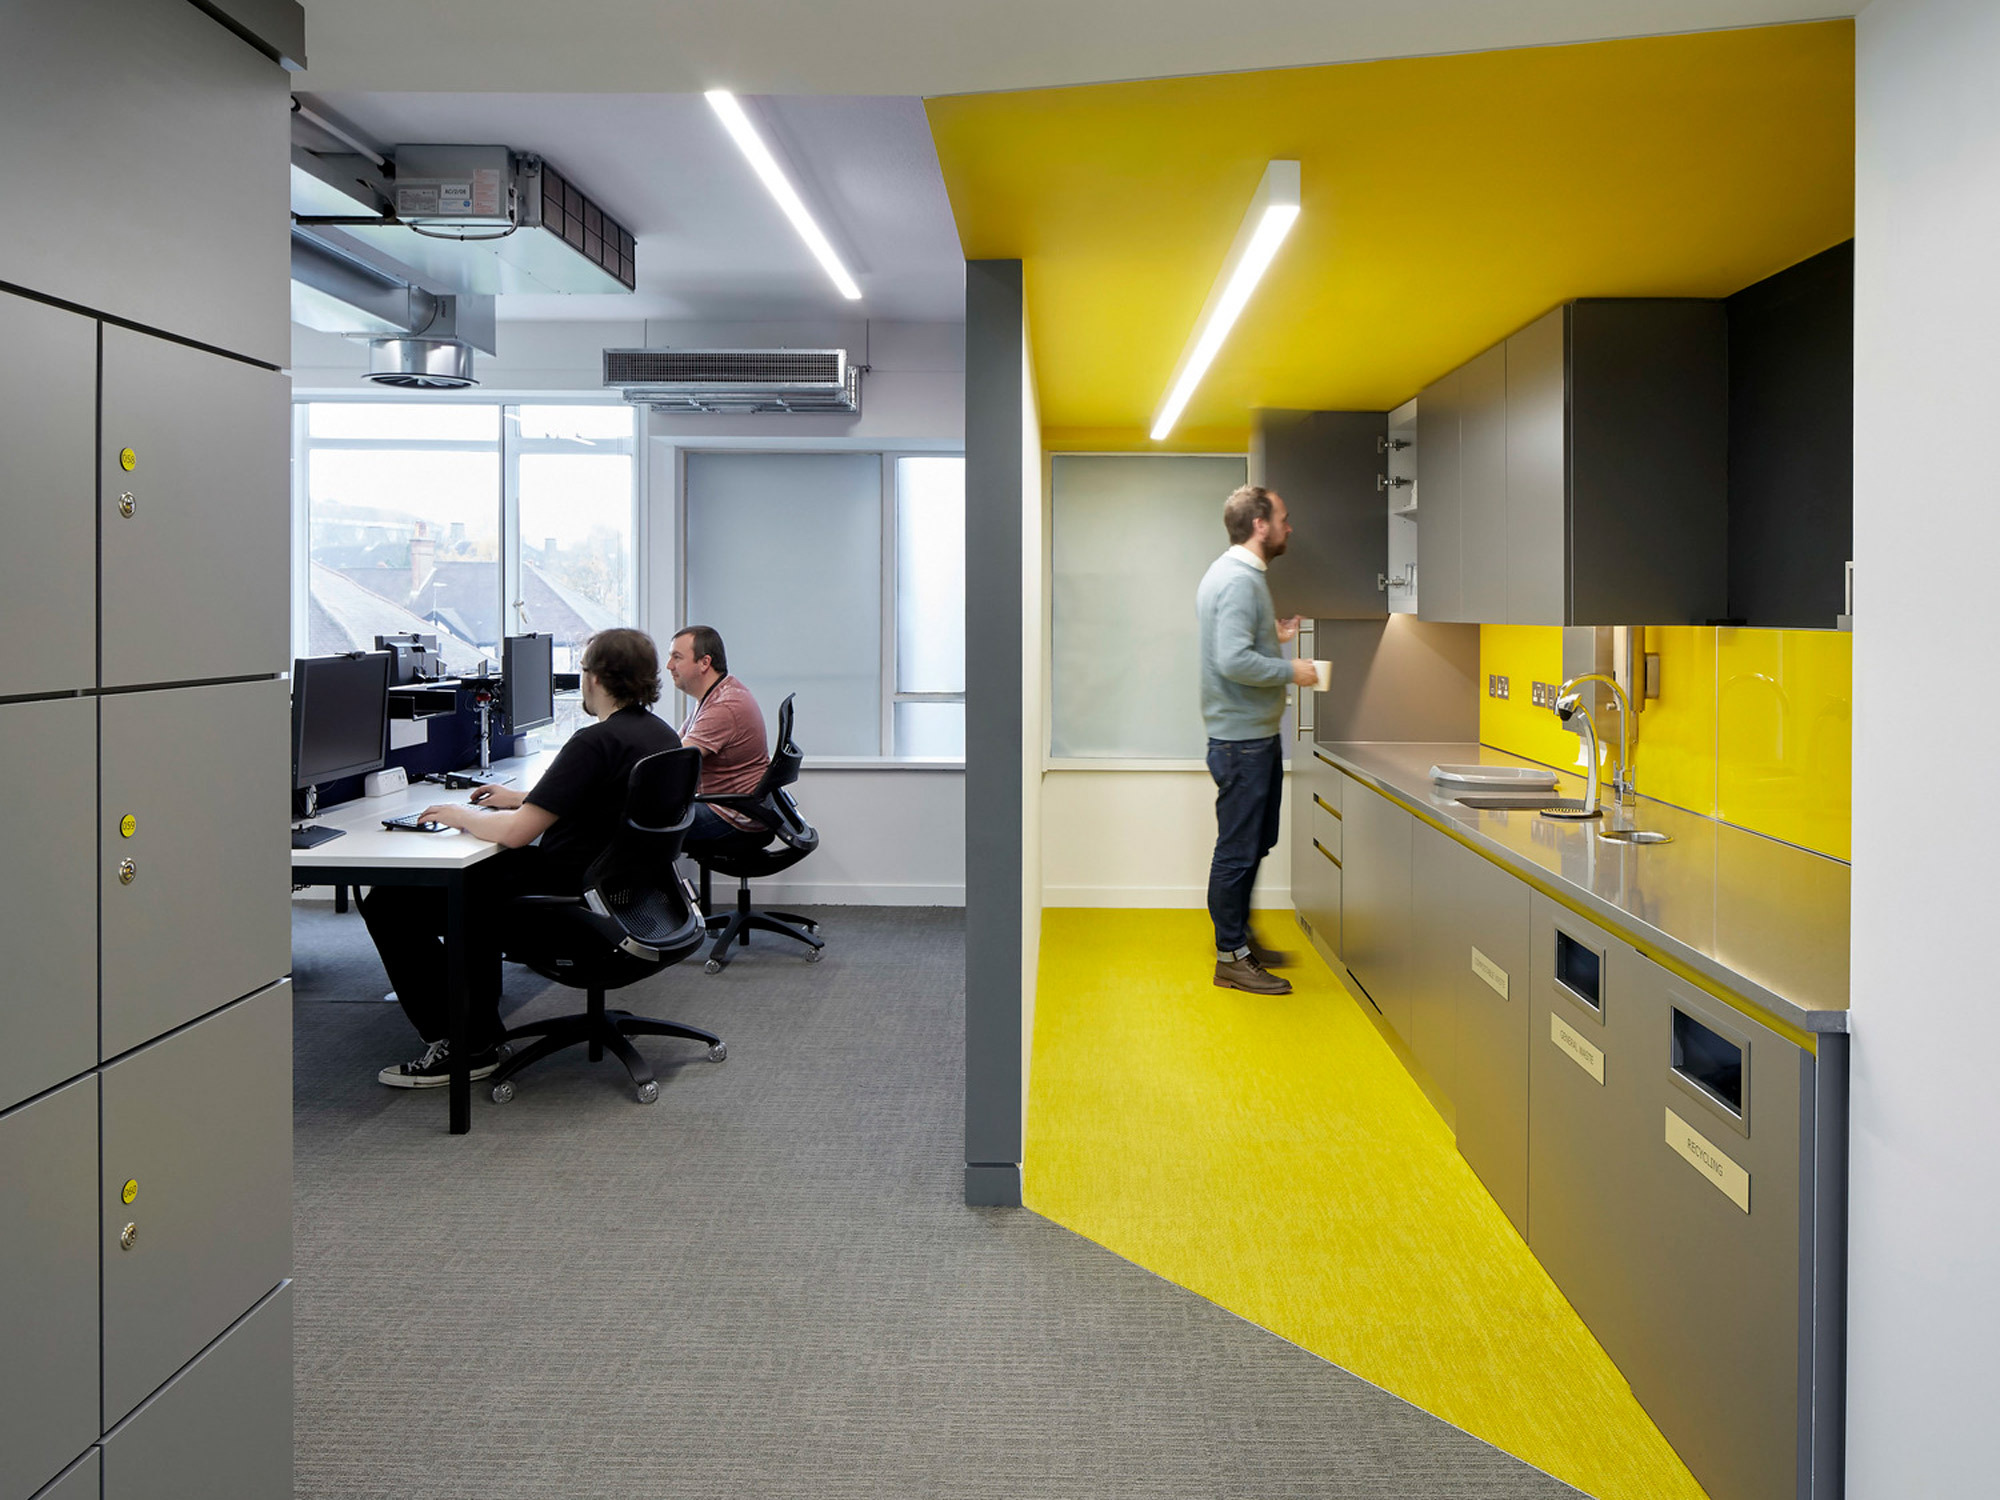 Modern office kitchenette with vibrant yellow backsplash and flooring, contrasting gray cabinetry, and stainless steel appliances. Two individuals work at adjacent desks, highlighting the space's functional and collaborative design.